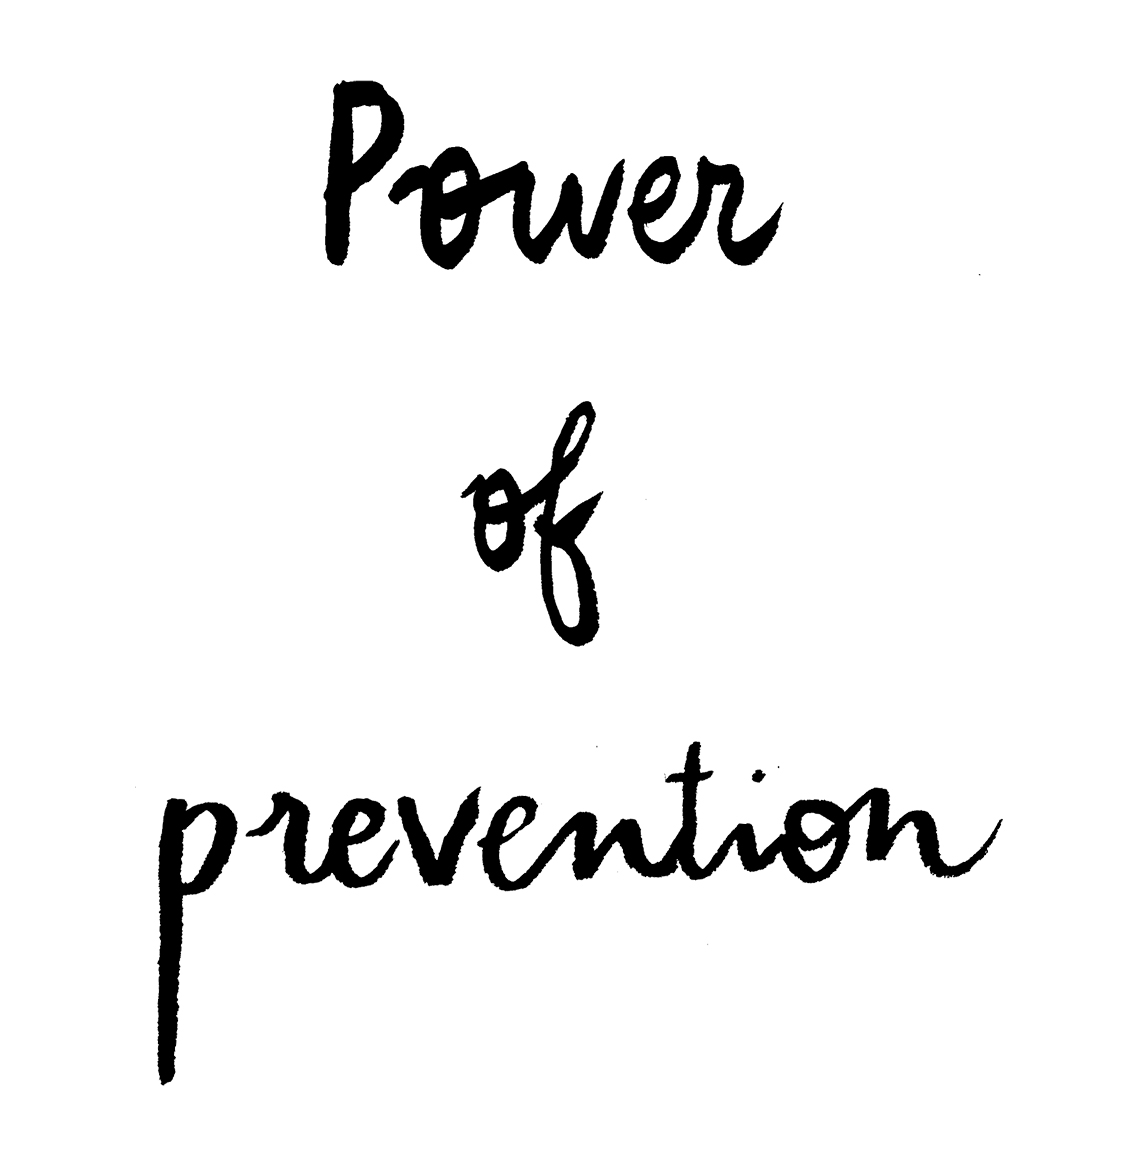 Power of prevention